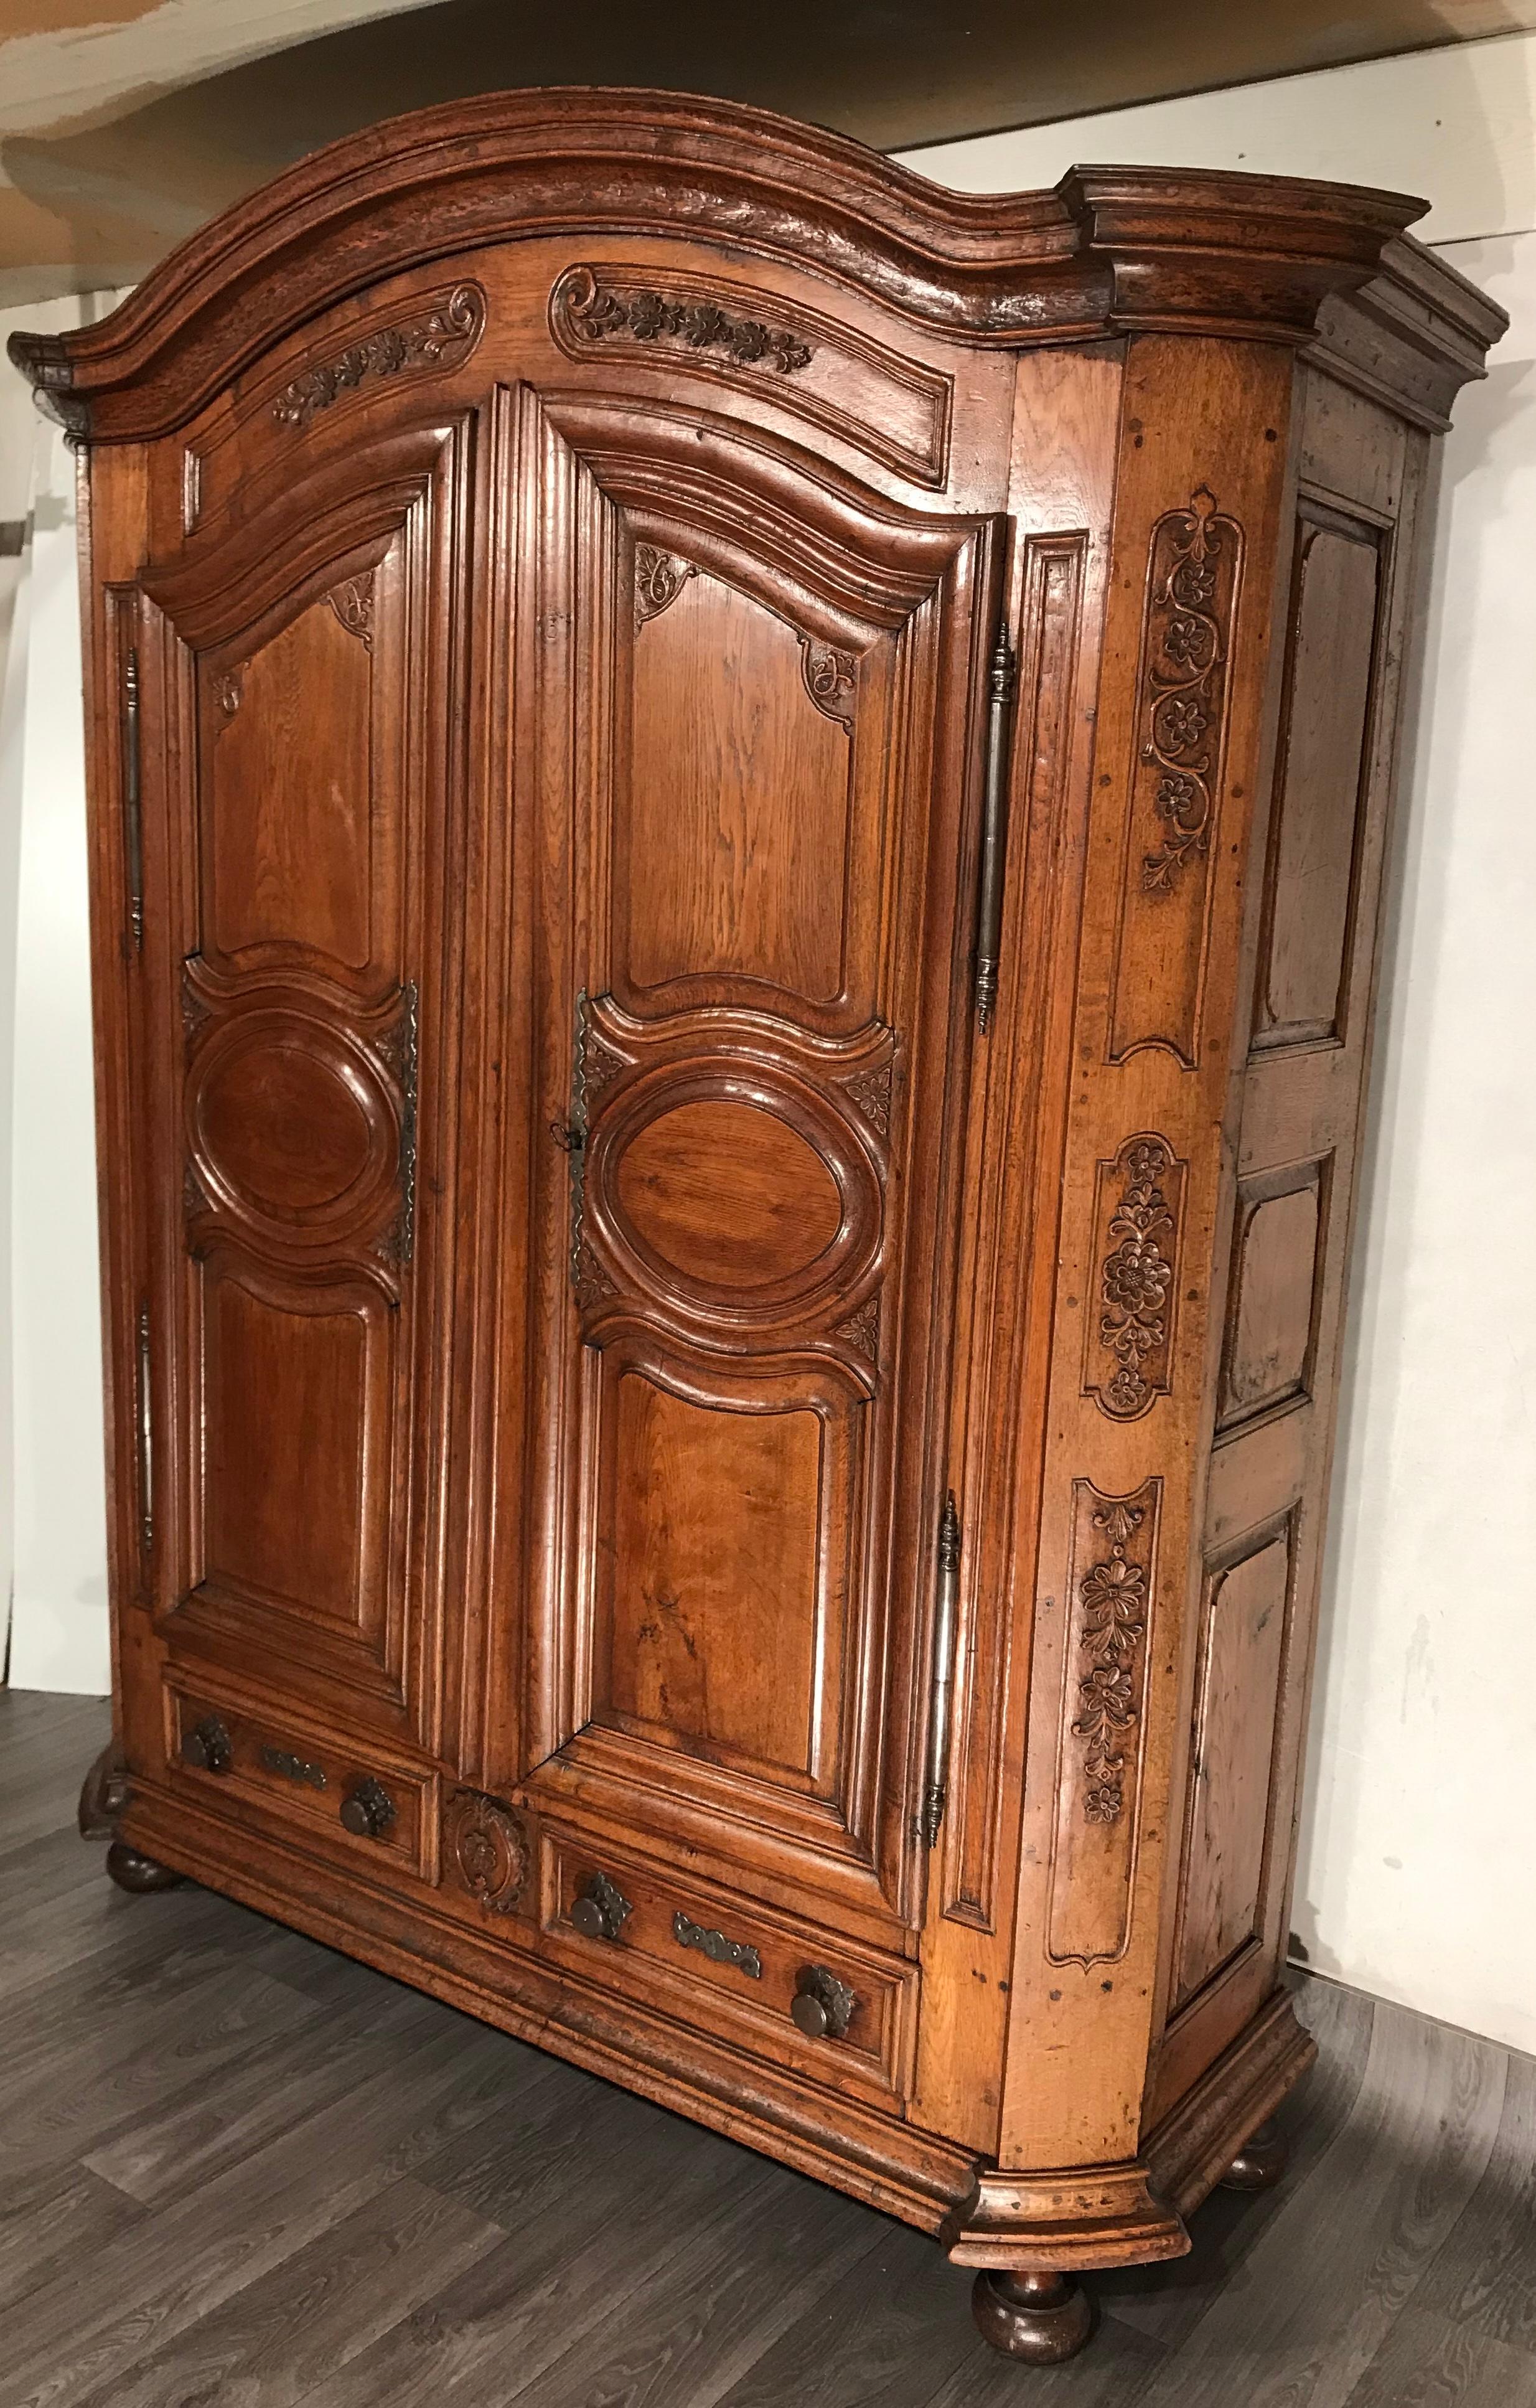 Baroque armoire, France, 1750. 
This unique impressive 18th century Baroque armoire comes from the eastern part of France. It is made of massive oak and has beautiful hand carved details. It comes with original fittings and key. 
The armoire is in